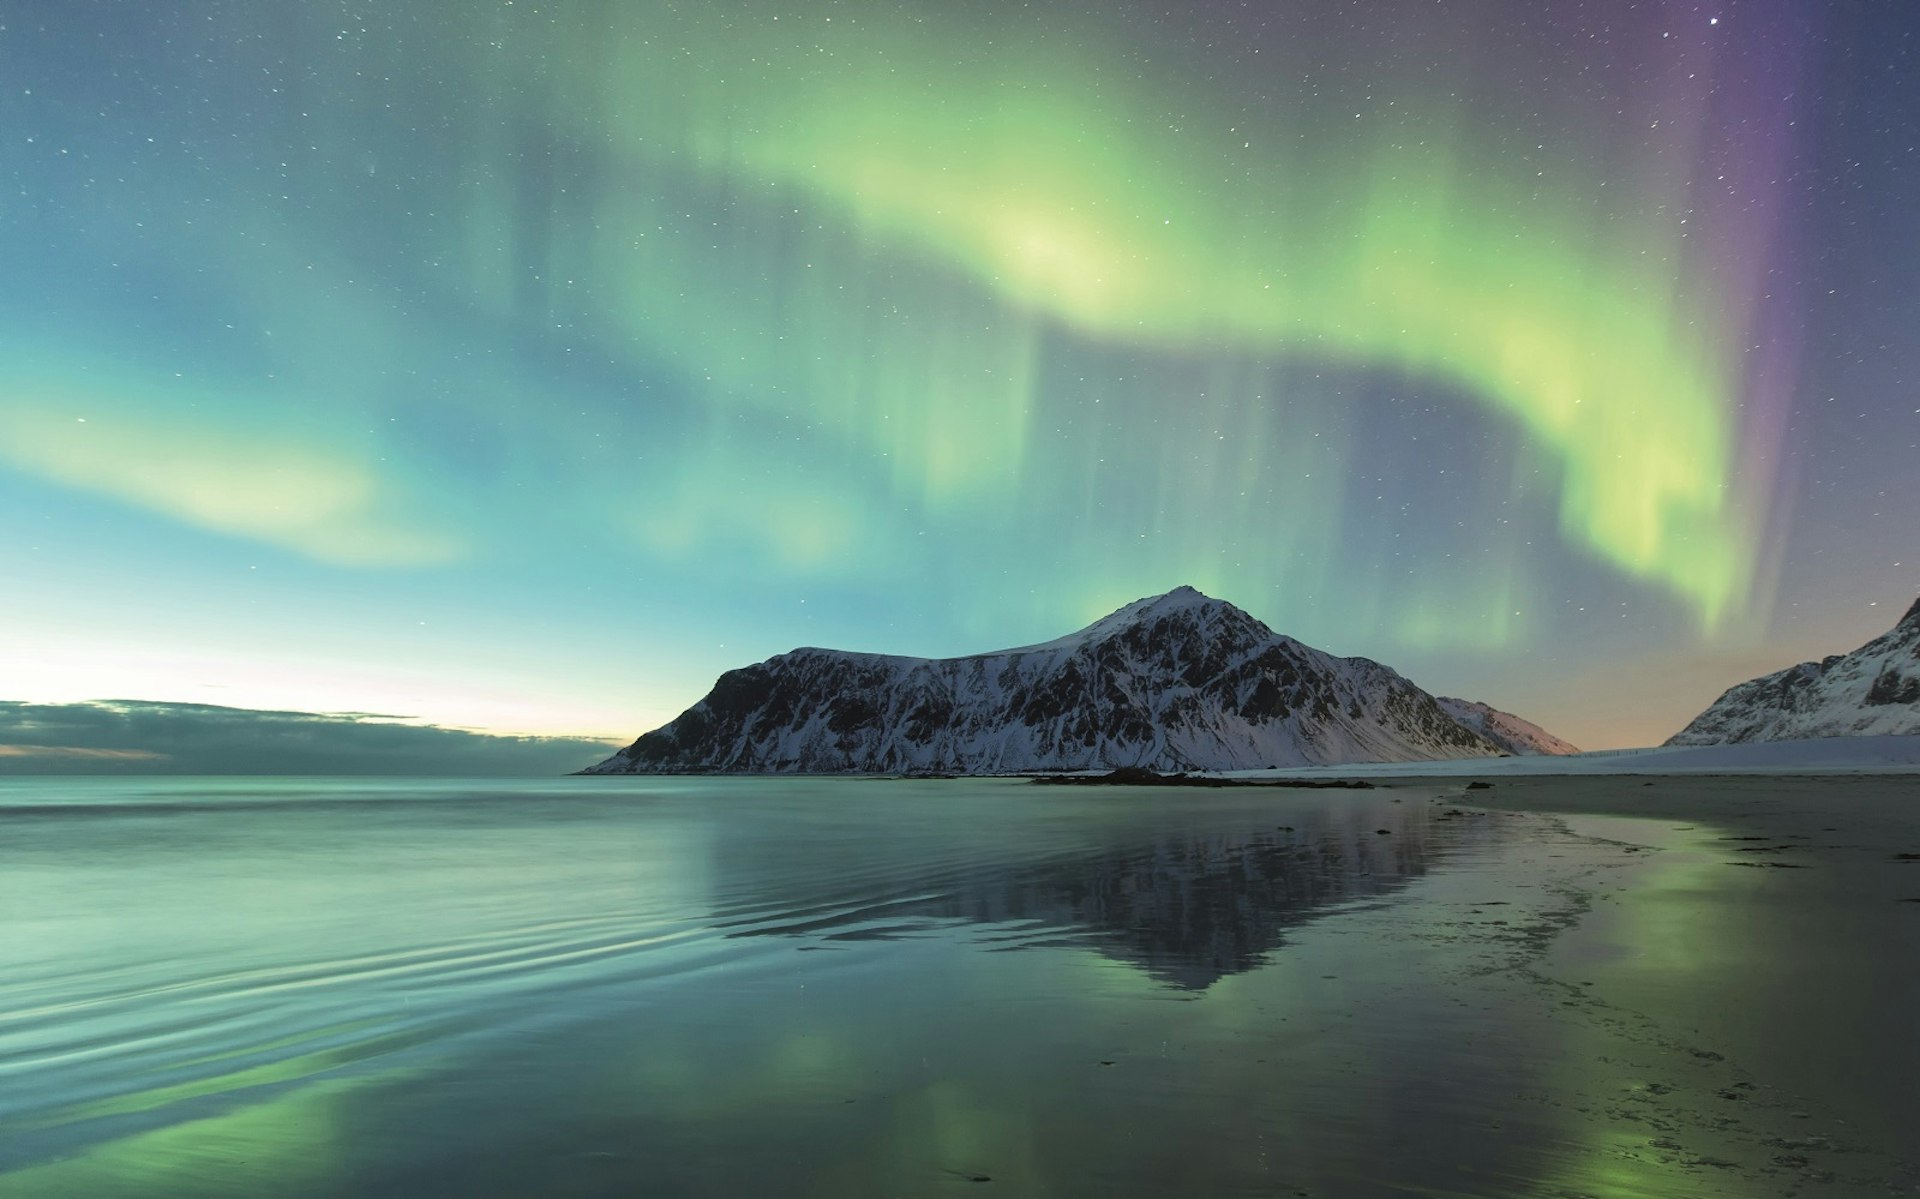 Green waves of the aurora move over a beach in Norway. A snowy mountain is in the background. © Spreephoto.de / Getty Images